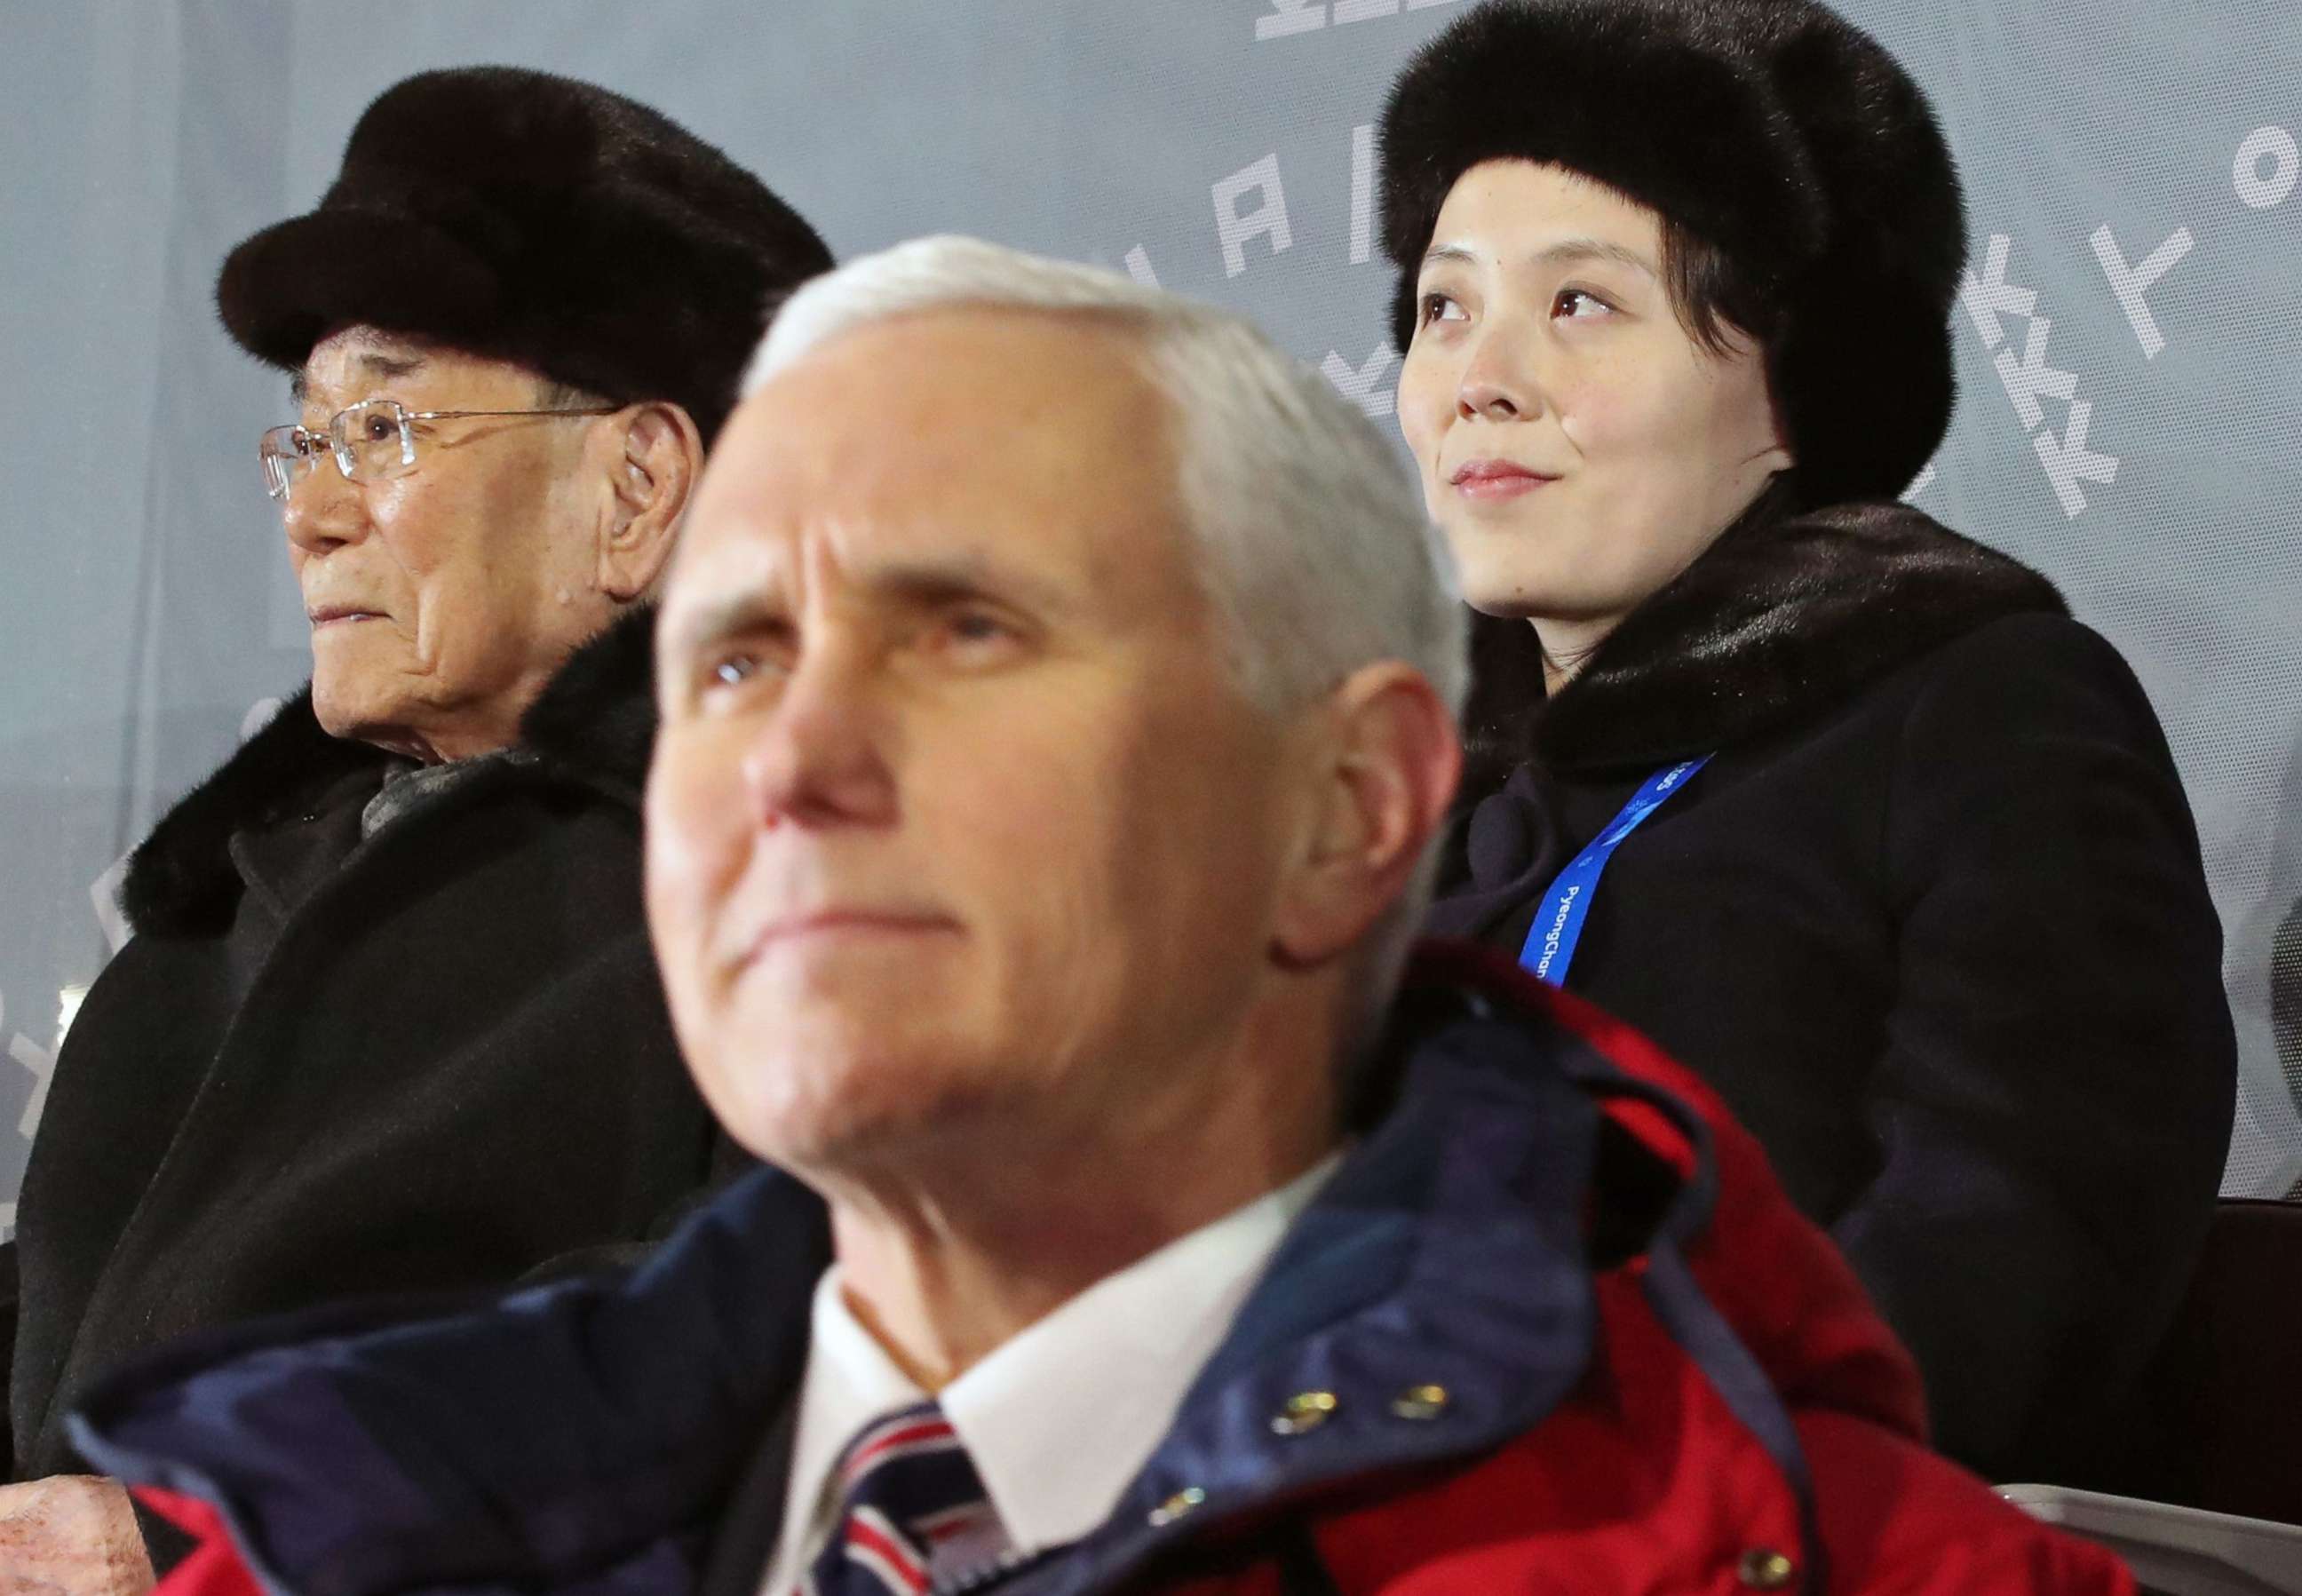 PHOTO: The sister of North Korean leader and North Korea's ceremonial head of state attend the Olympic Opening Ceremony behind Vice President Mike Pence in South Korea, Feb. 9, 2018.